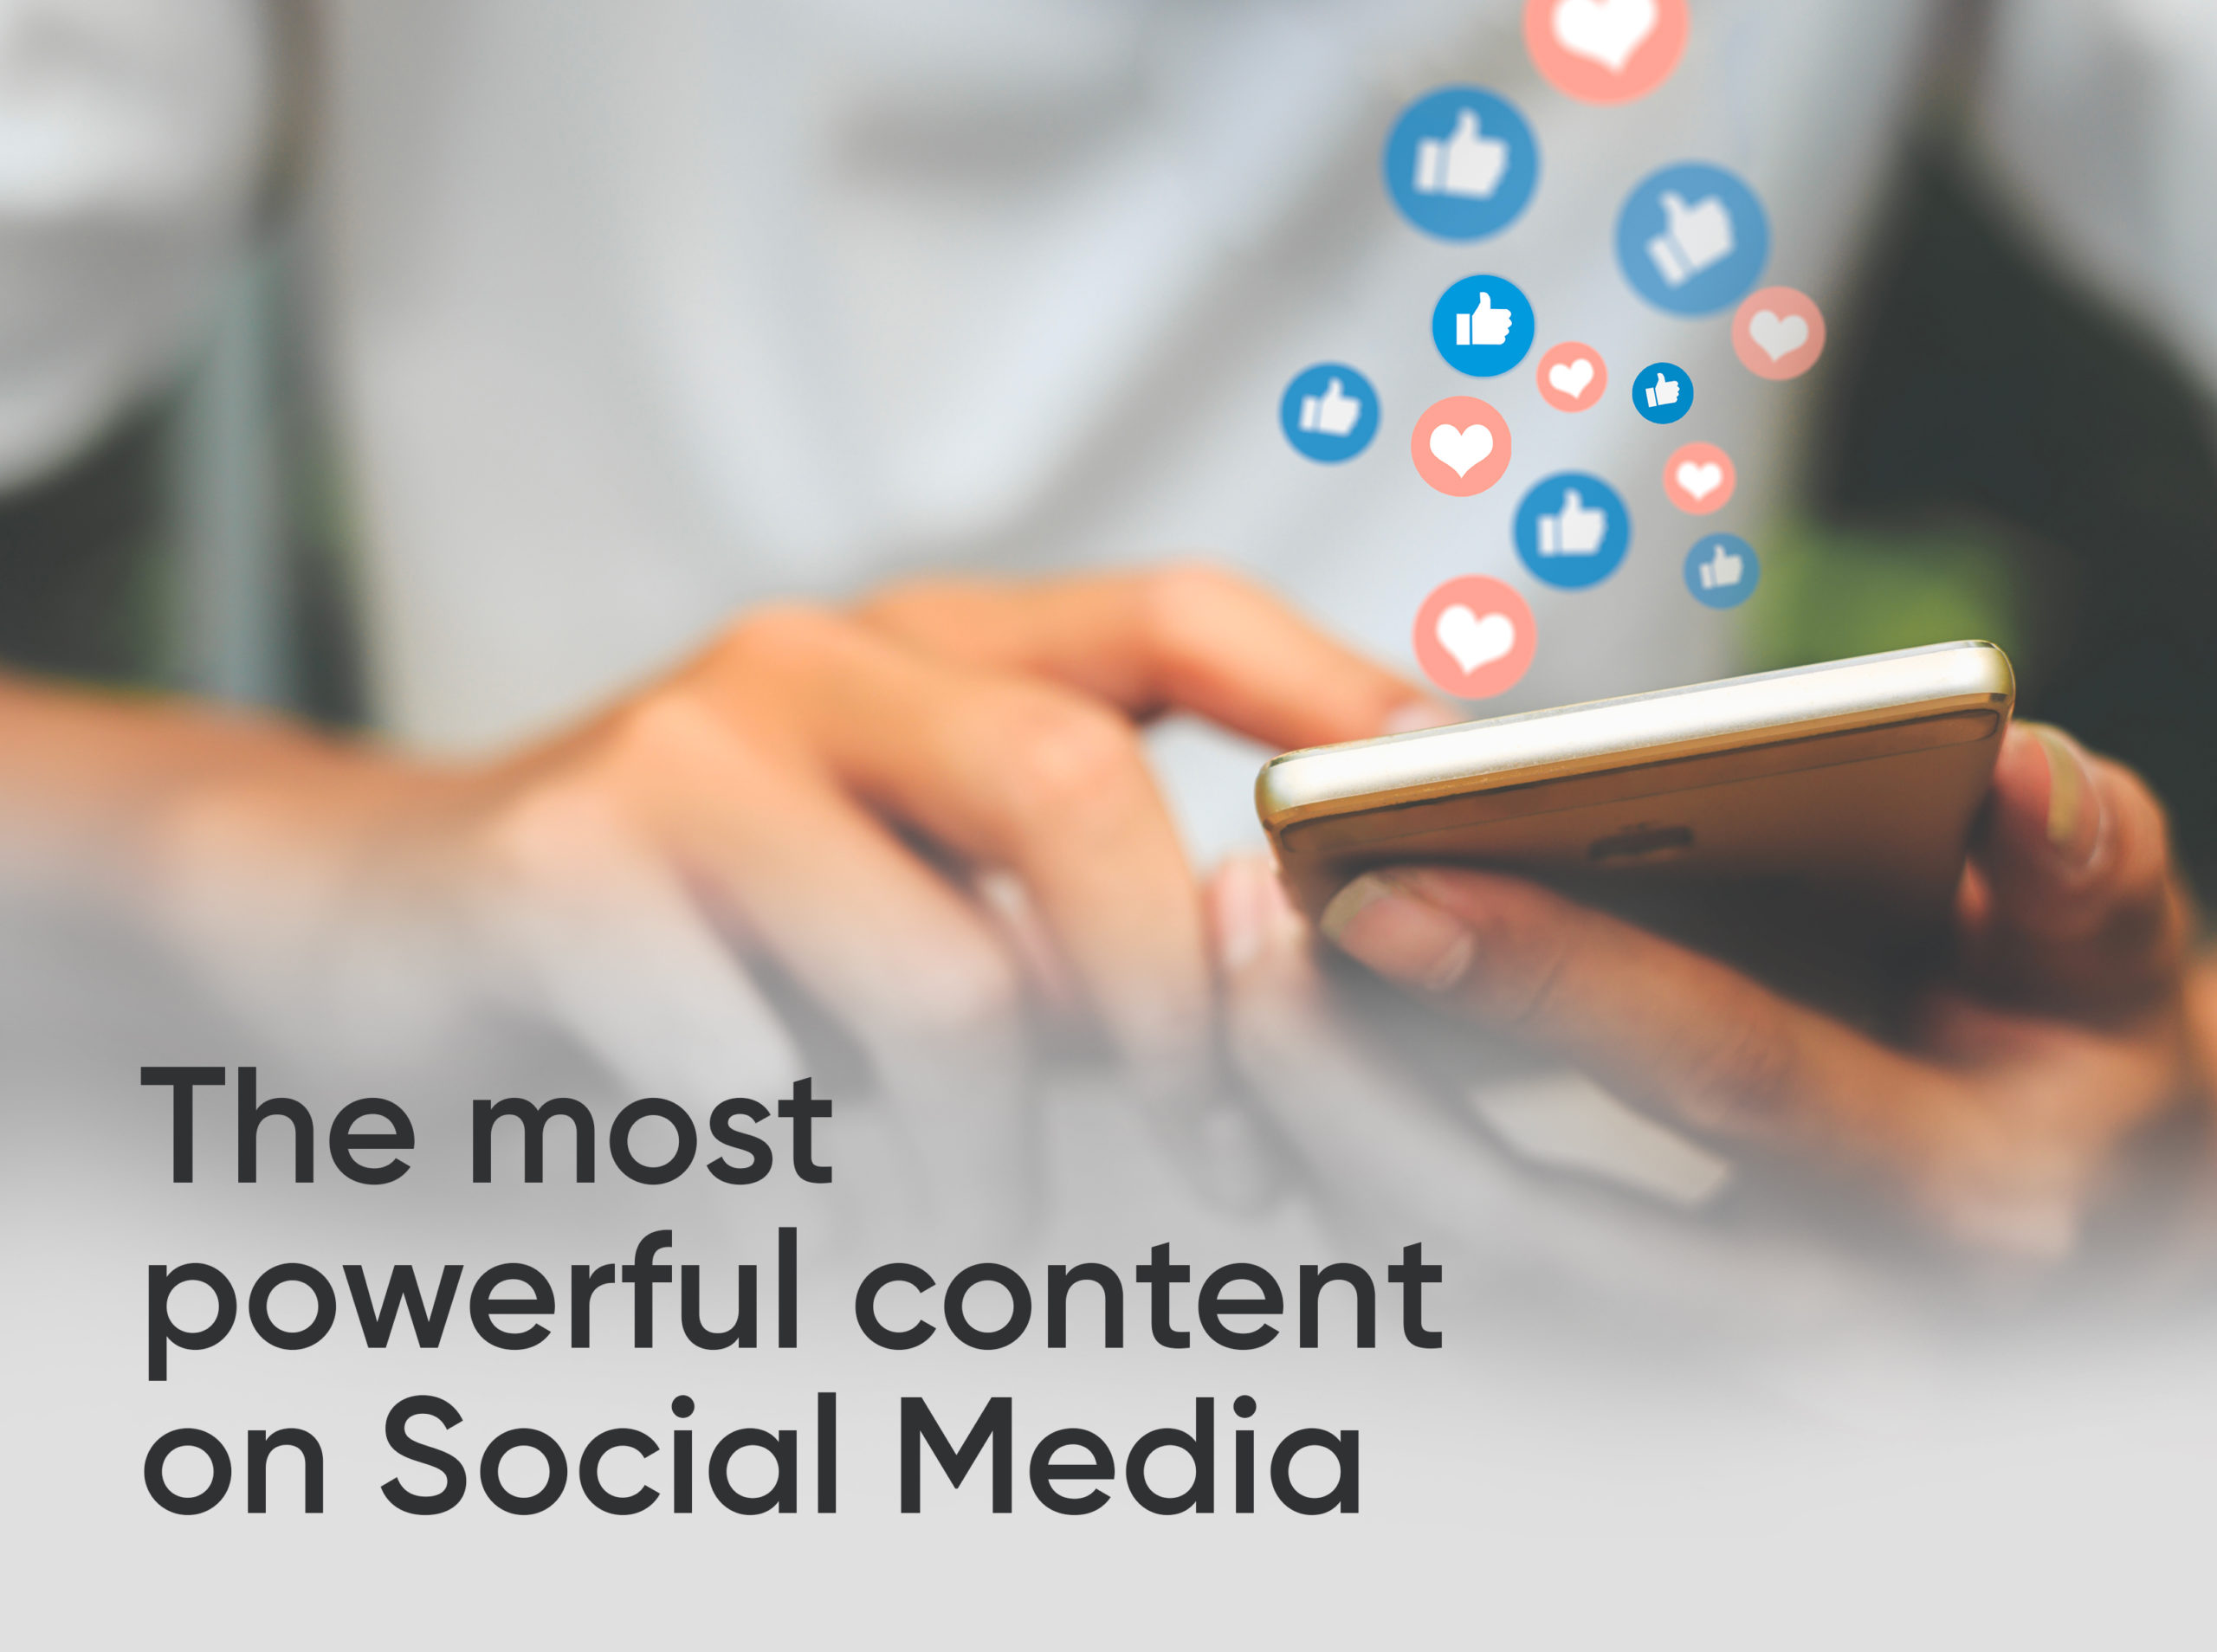 The most powerful content on Social Media